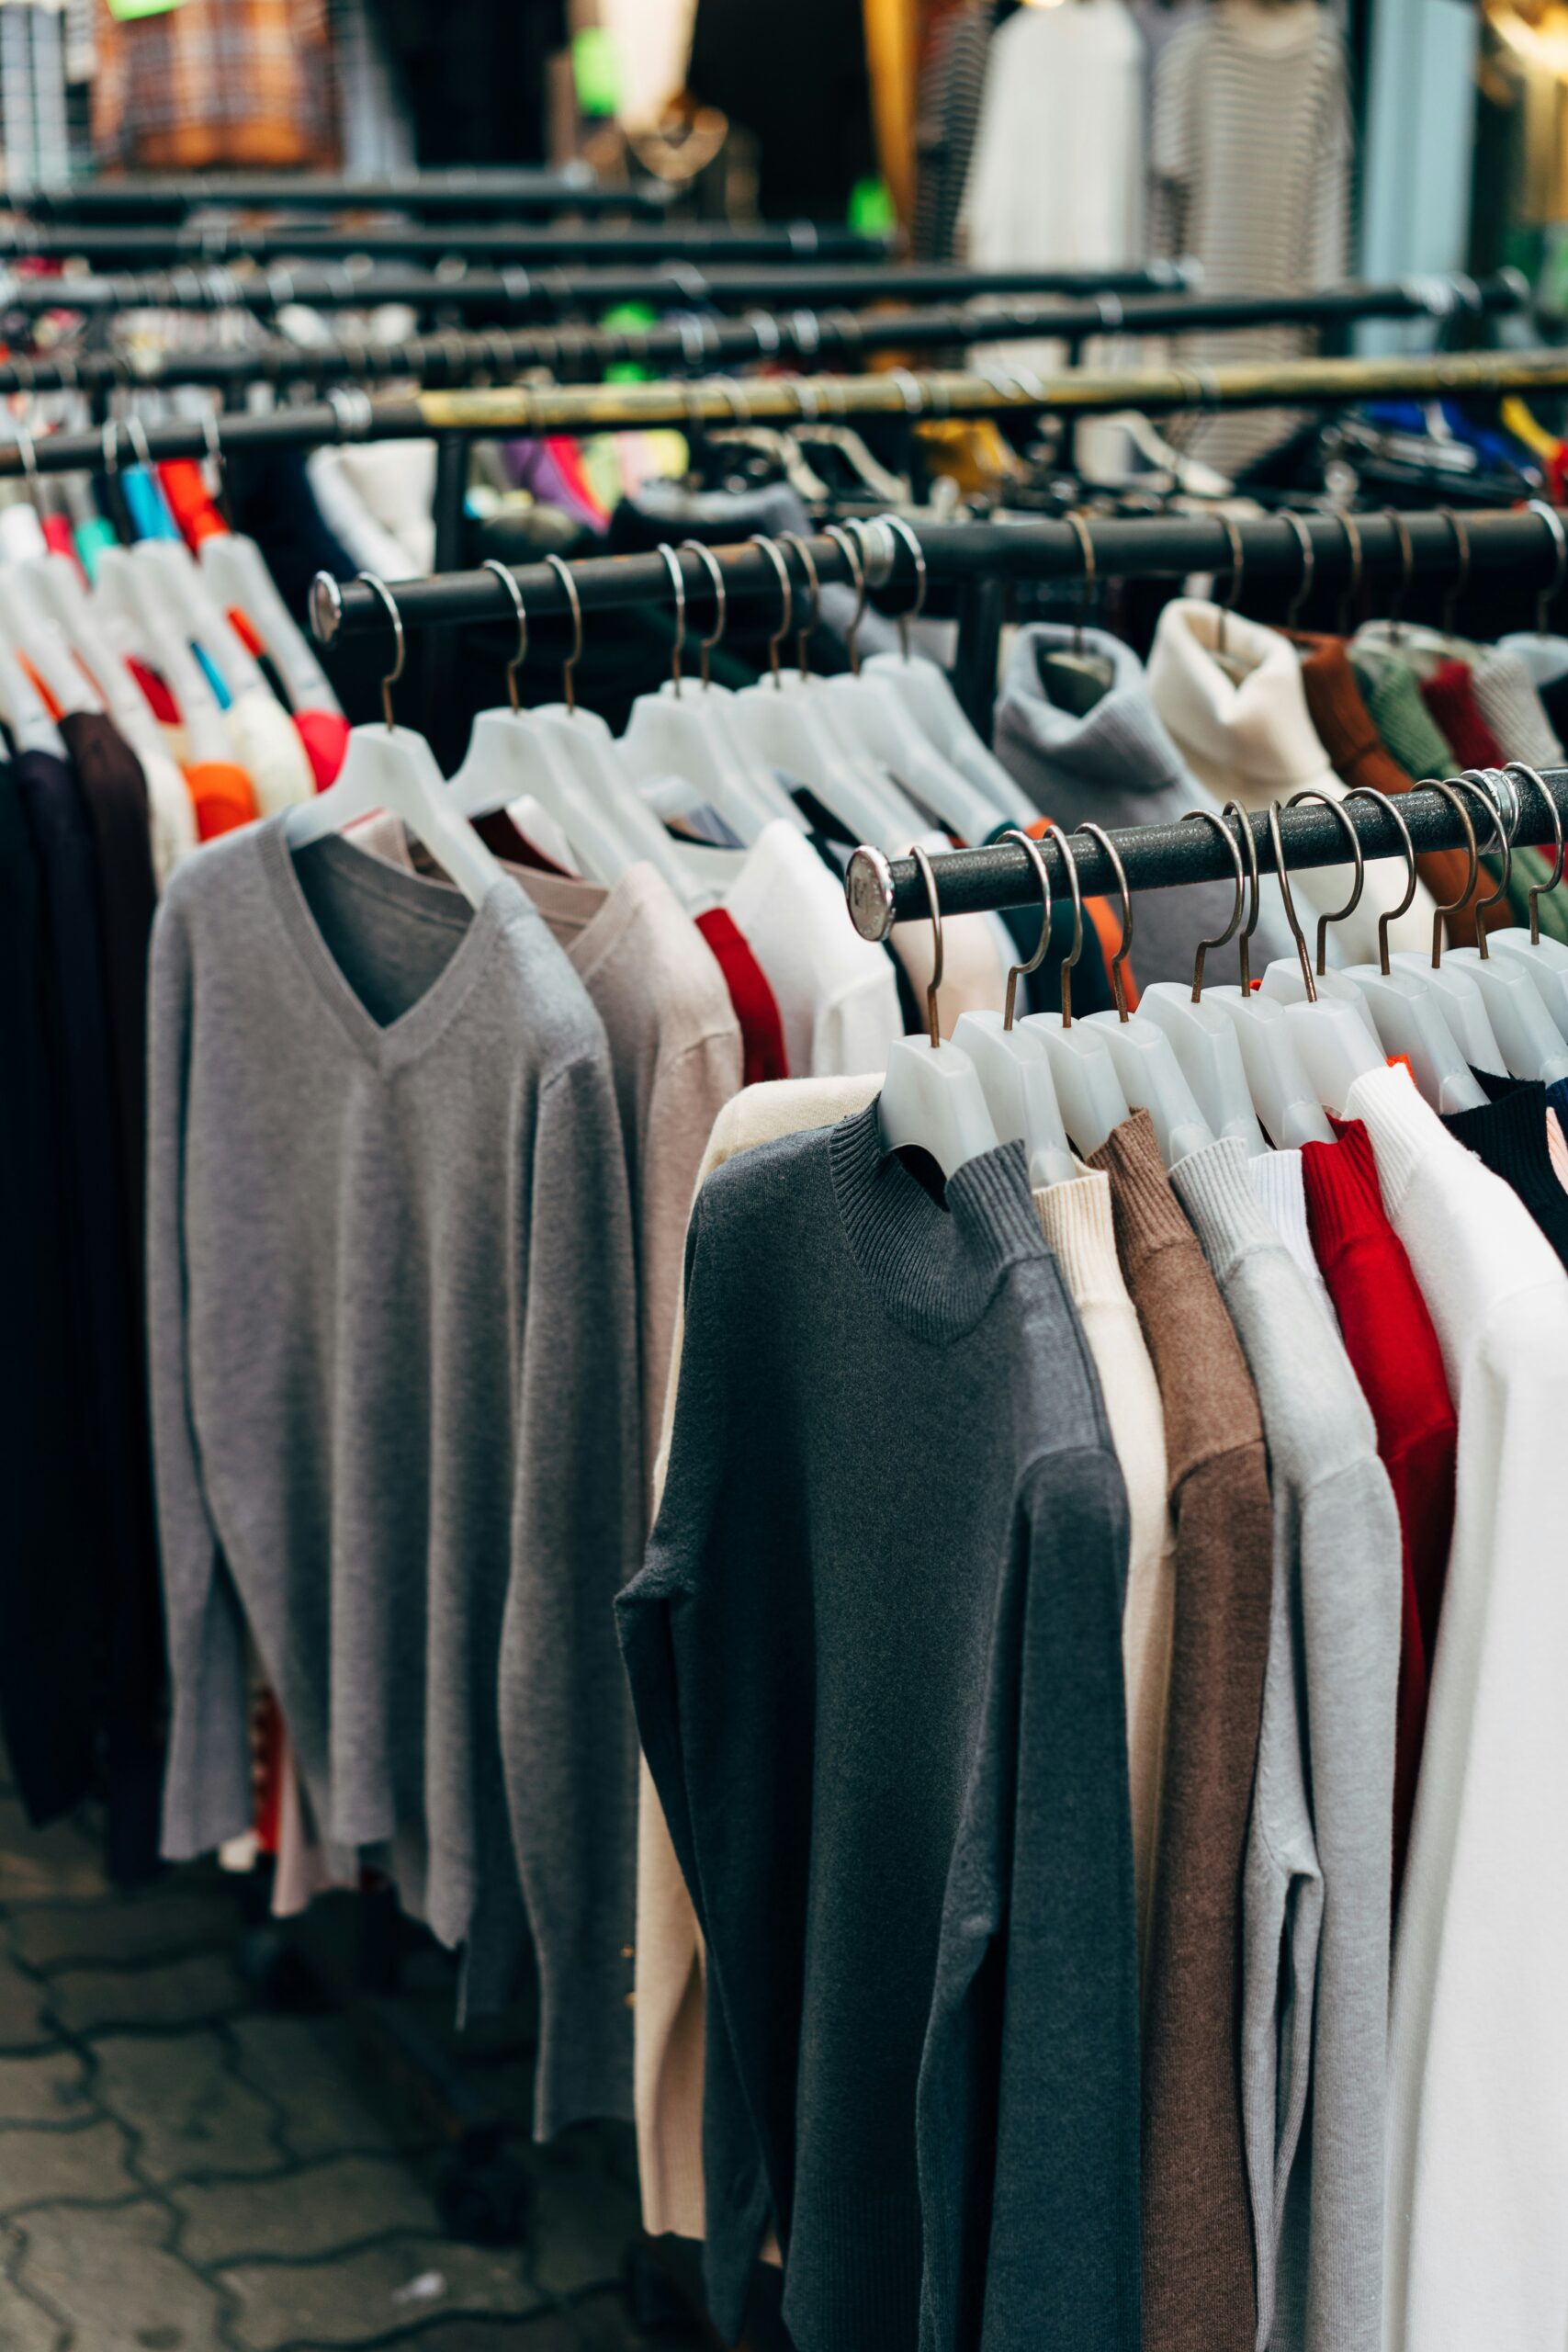 assortment of clothes hanging on racks in the best Portland thrift stores